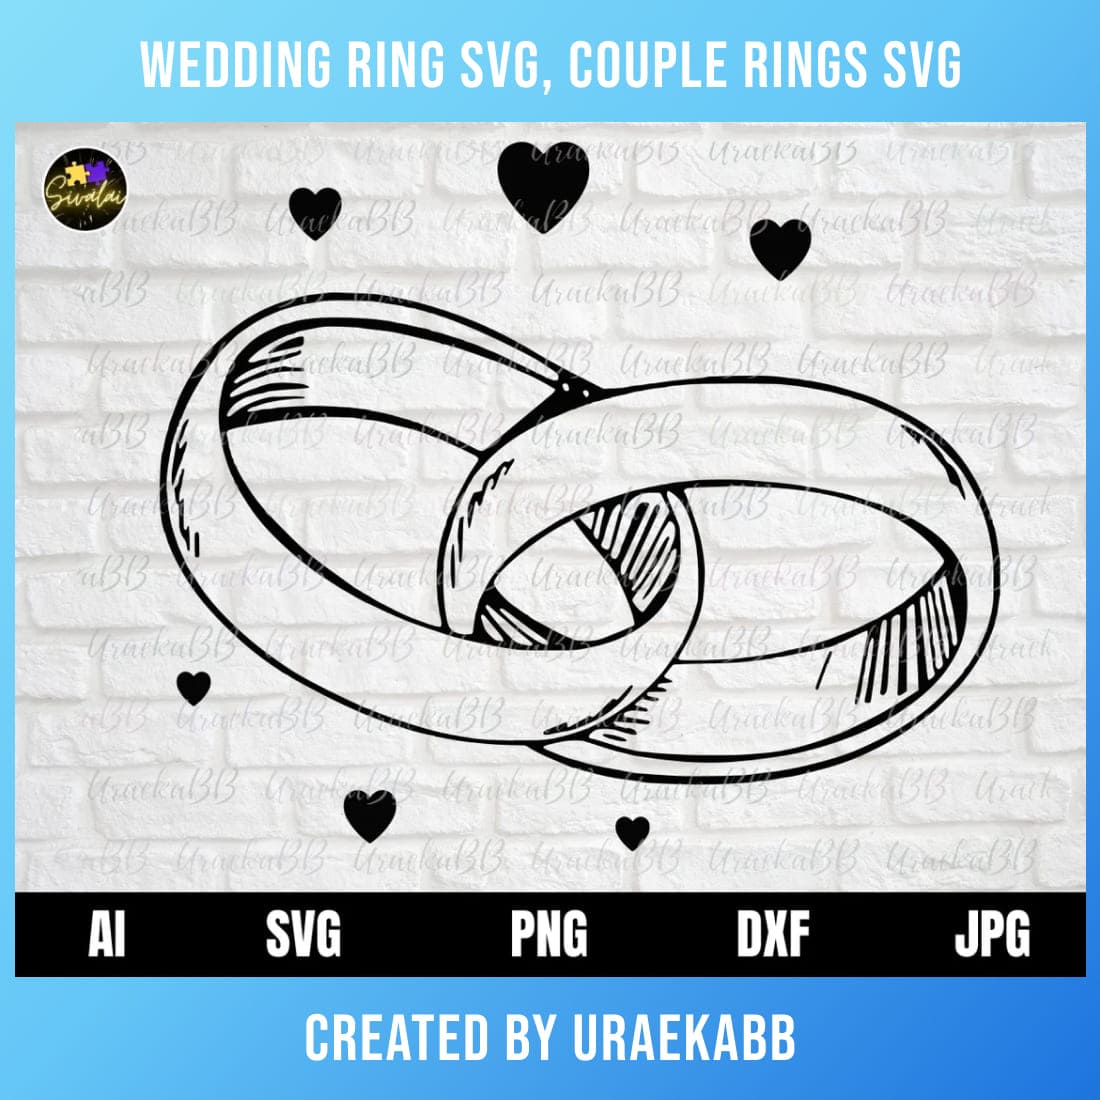 Wedding Ring SVG main cover.